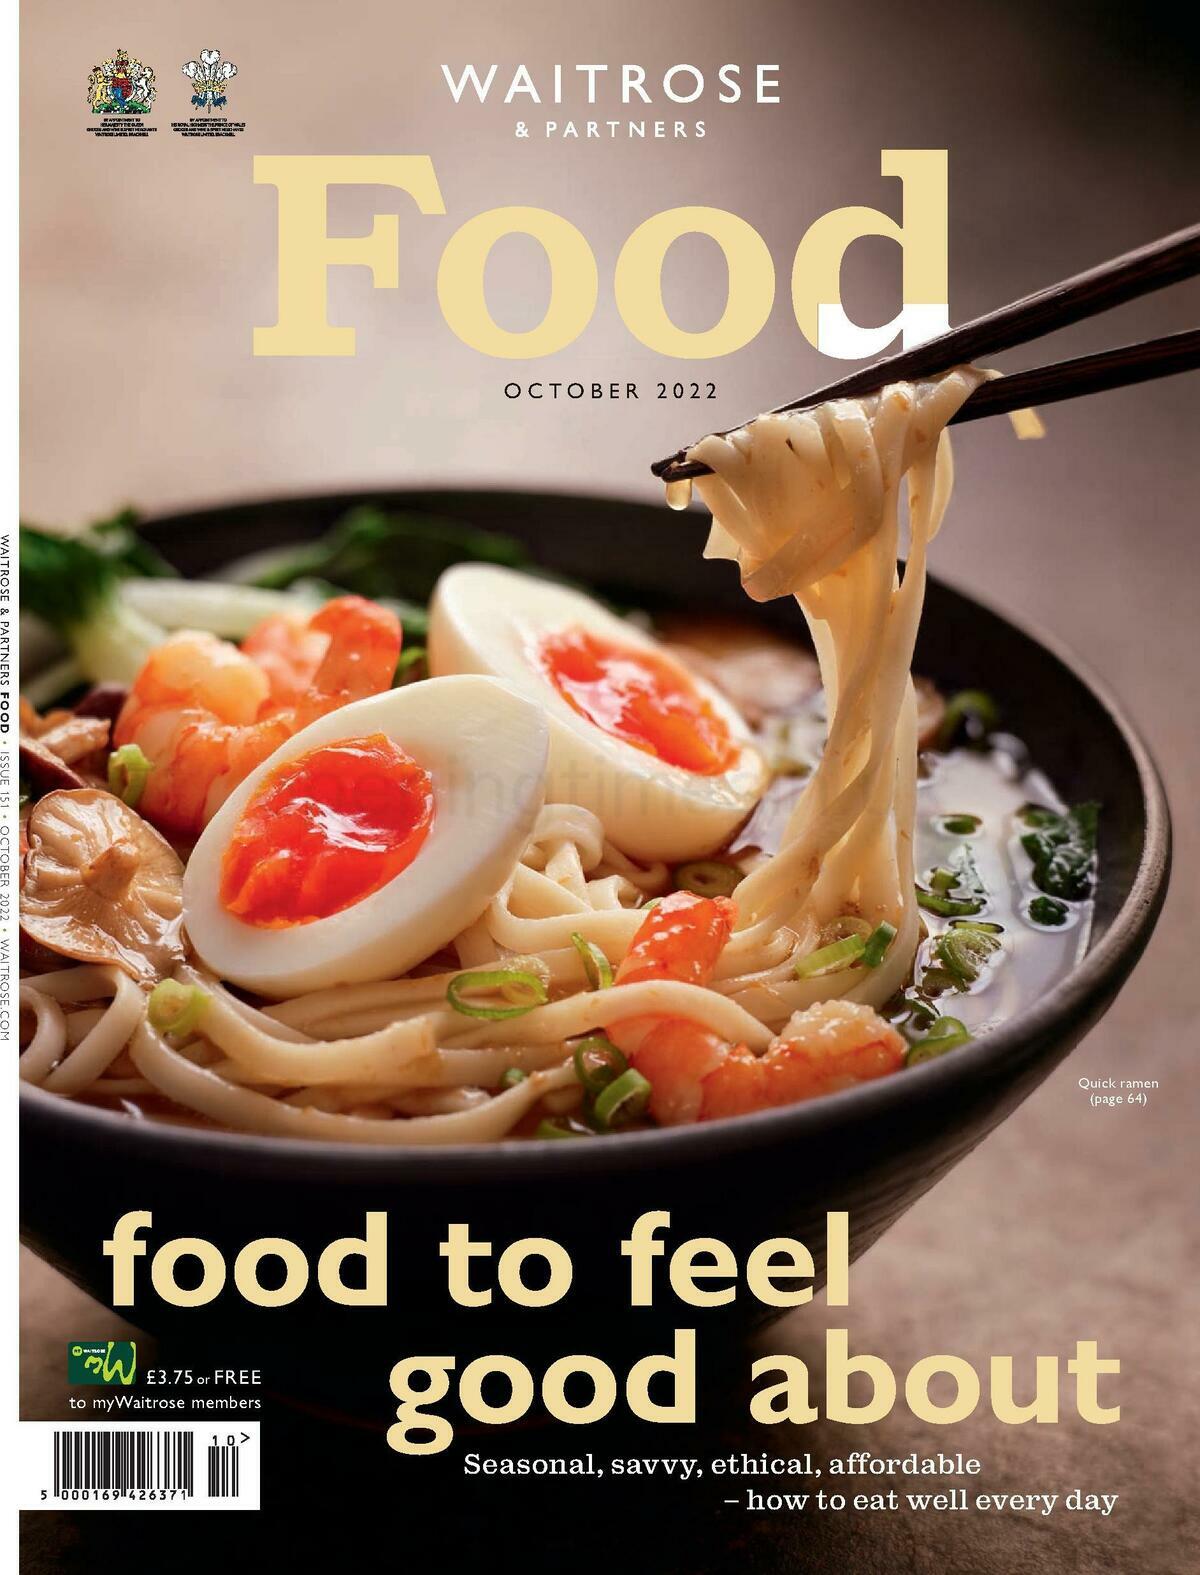 Waitrose Food Magazine October Offers from 1 October